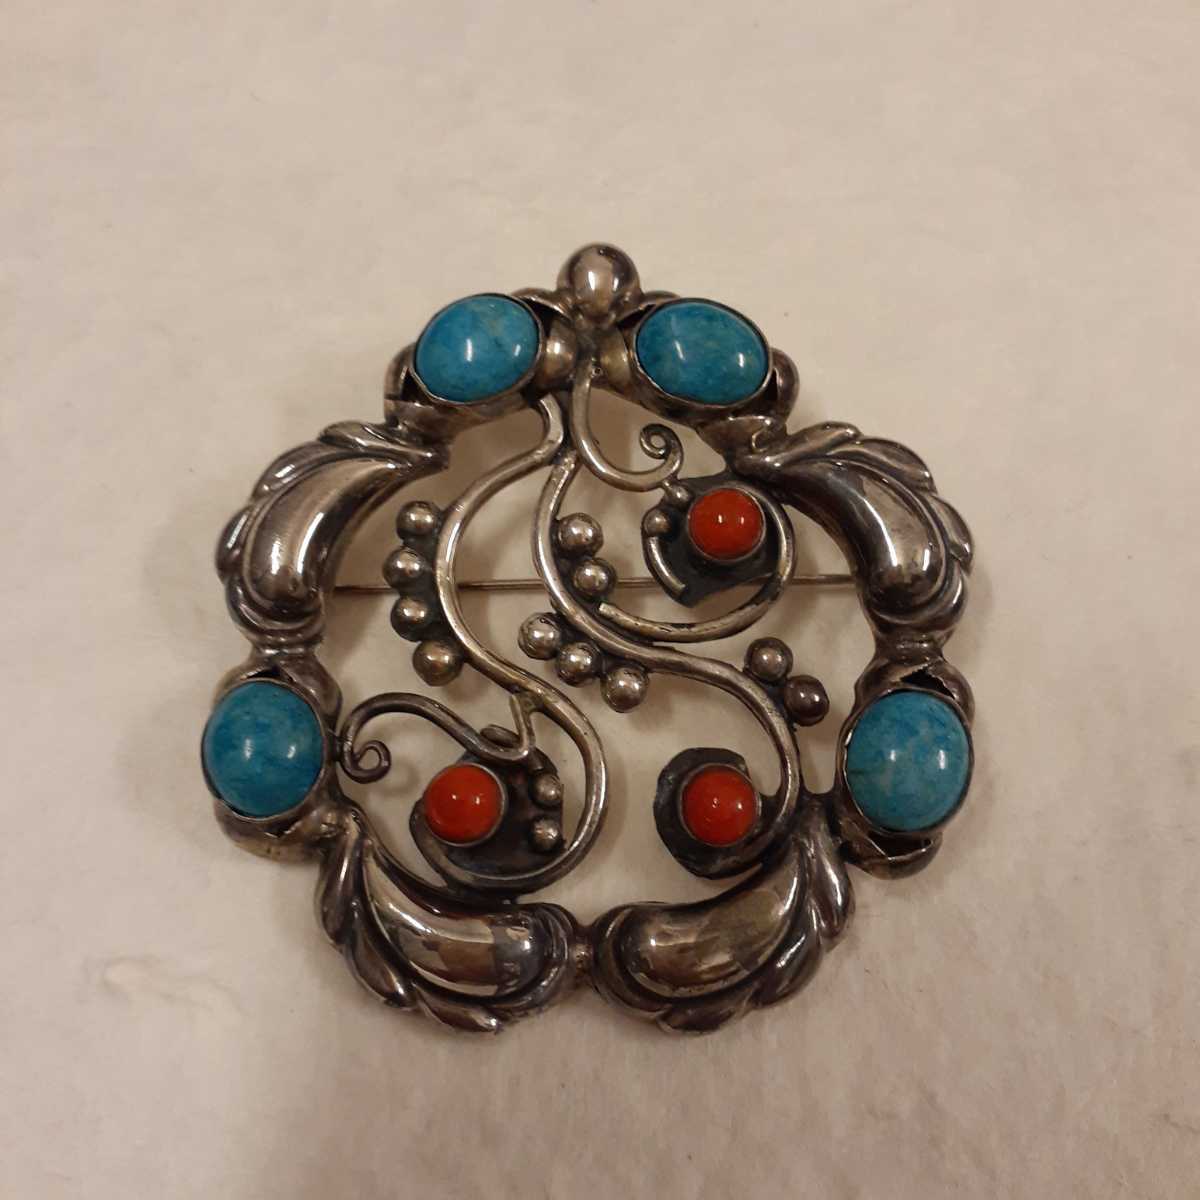  Mexico silver 925 turquoise .. brooch approximately 6cm×5.7cm×0.7cm